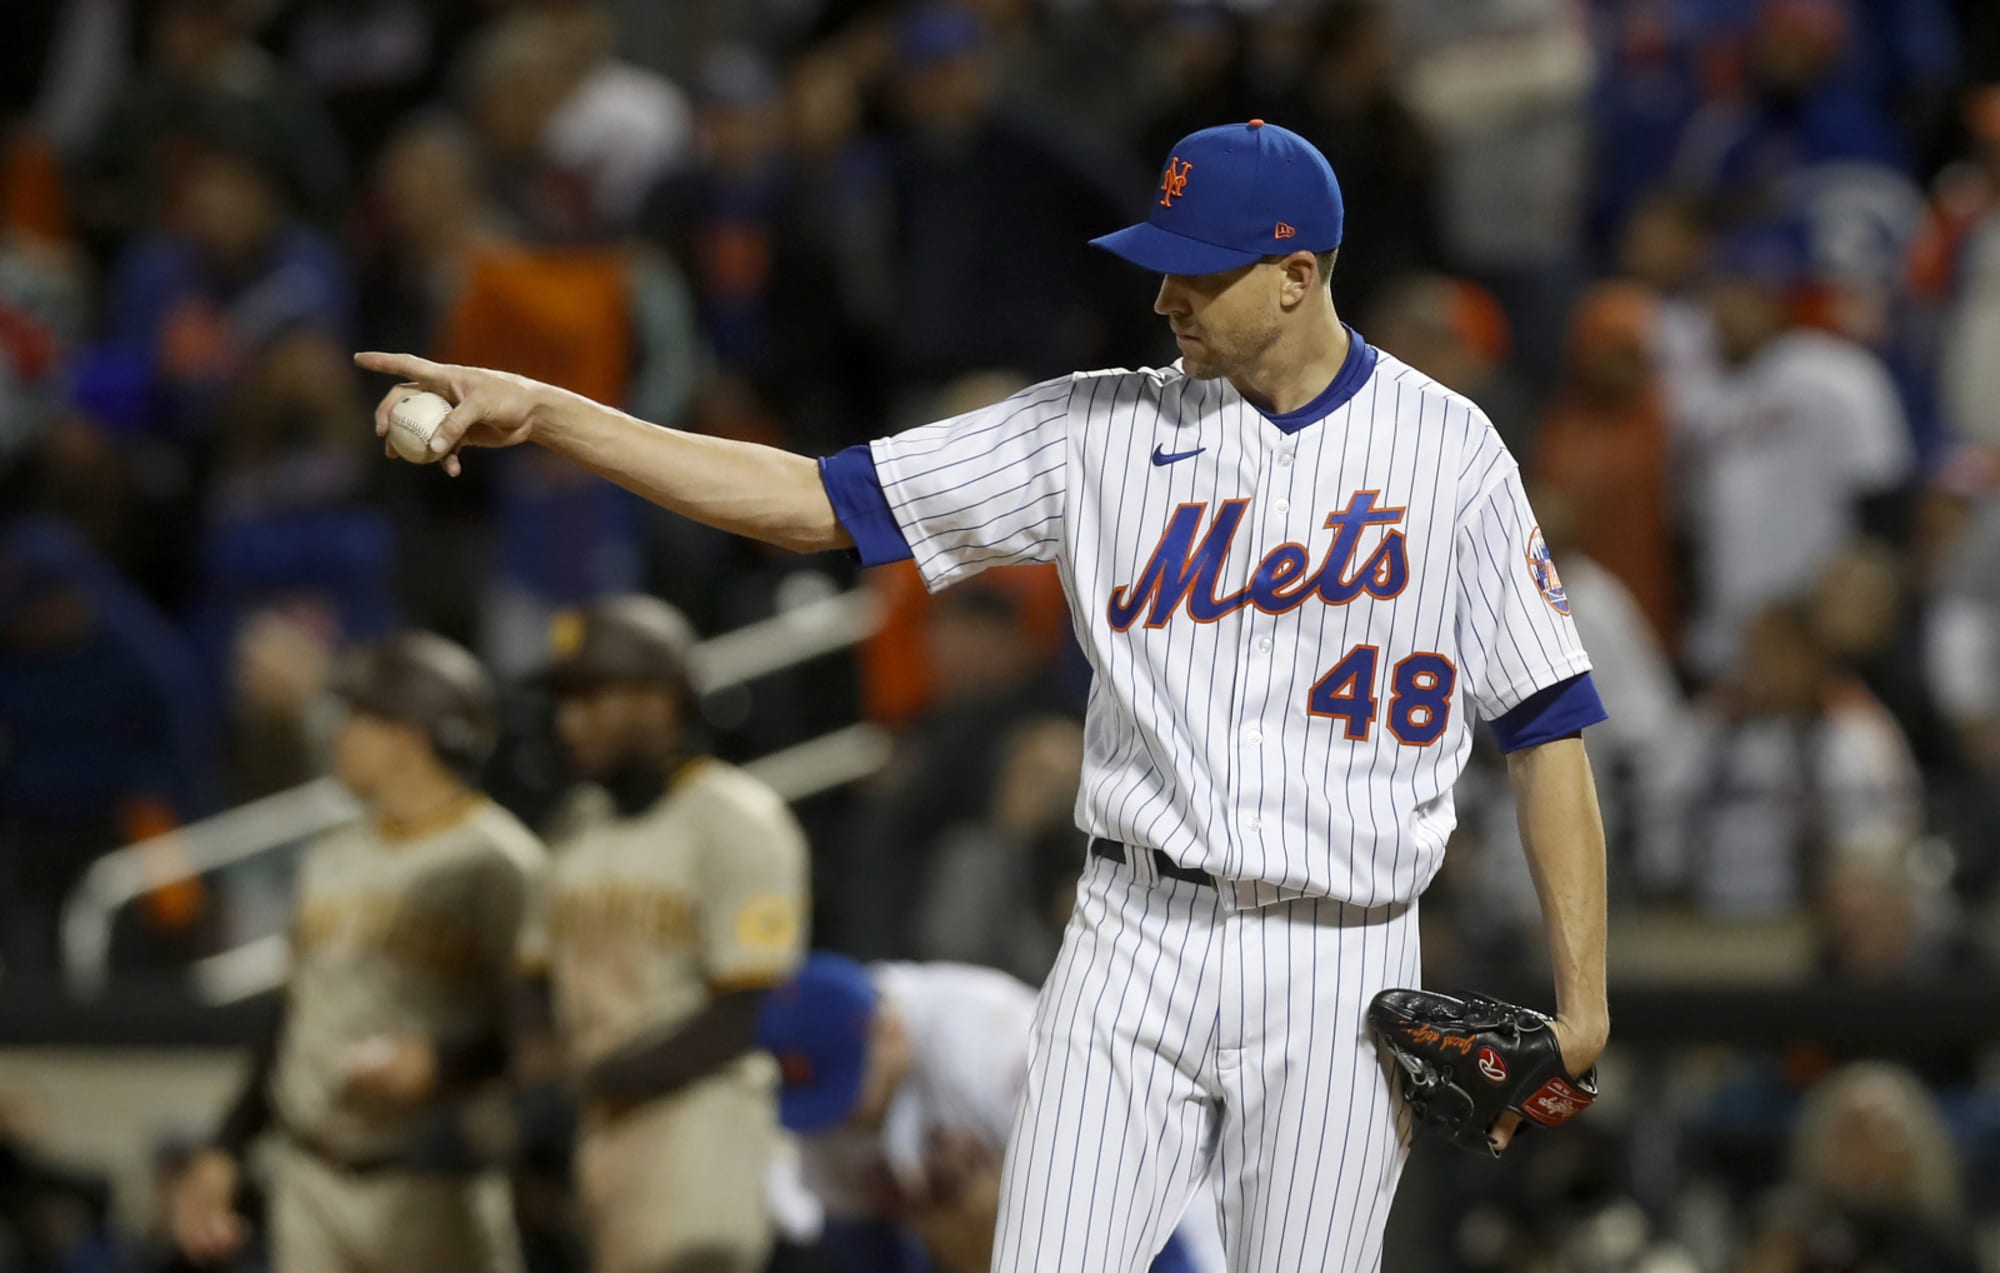 Jacob deGrom happy to join Texas Rangers, says leaving Mets was 'just how  it worked out' - Newsday